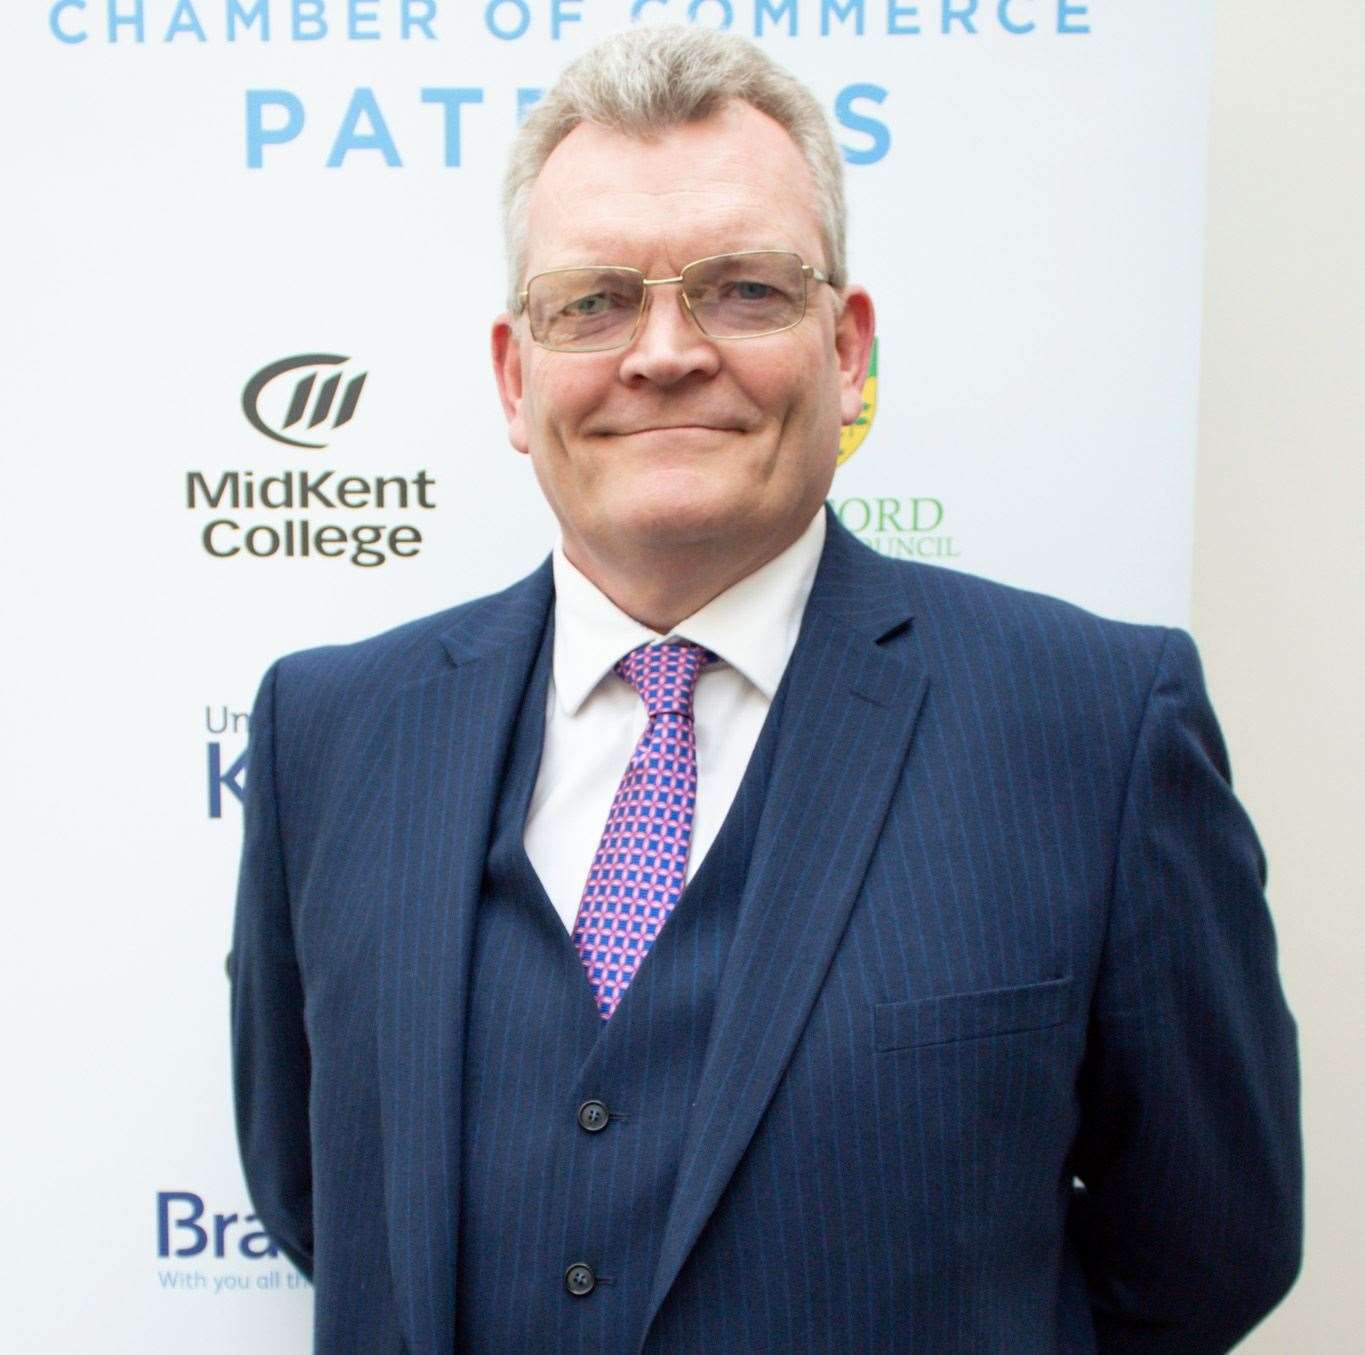 Tudor Price, Deputy Chief Executive at the Kent Invicta Chamber of Commerce